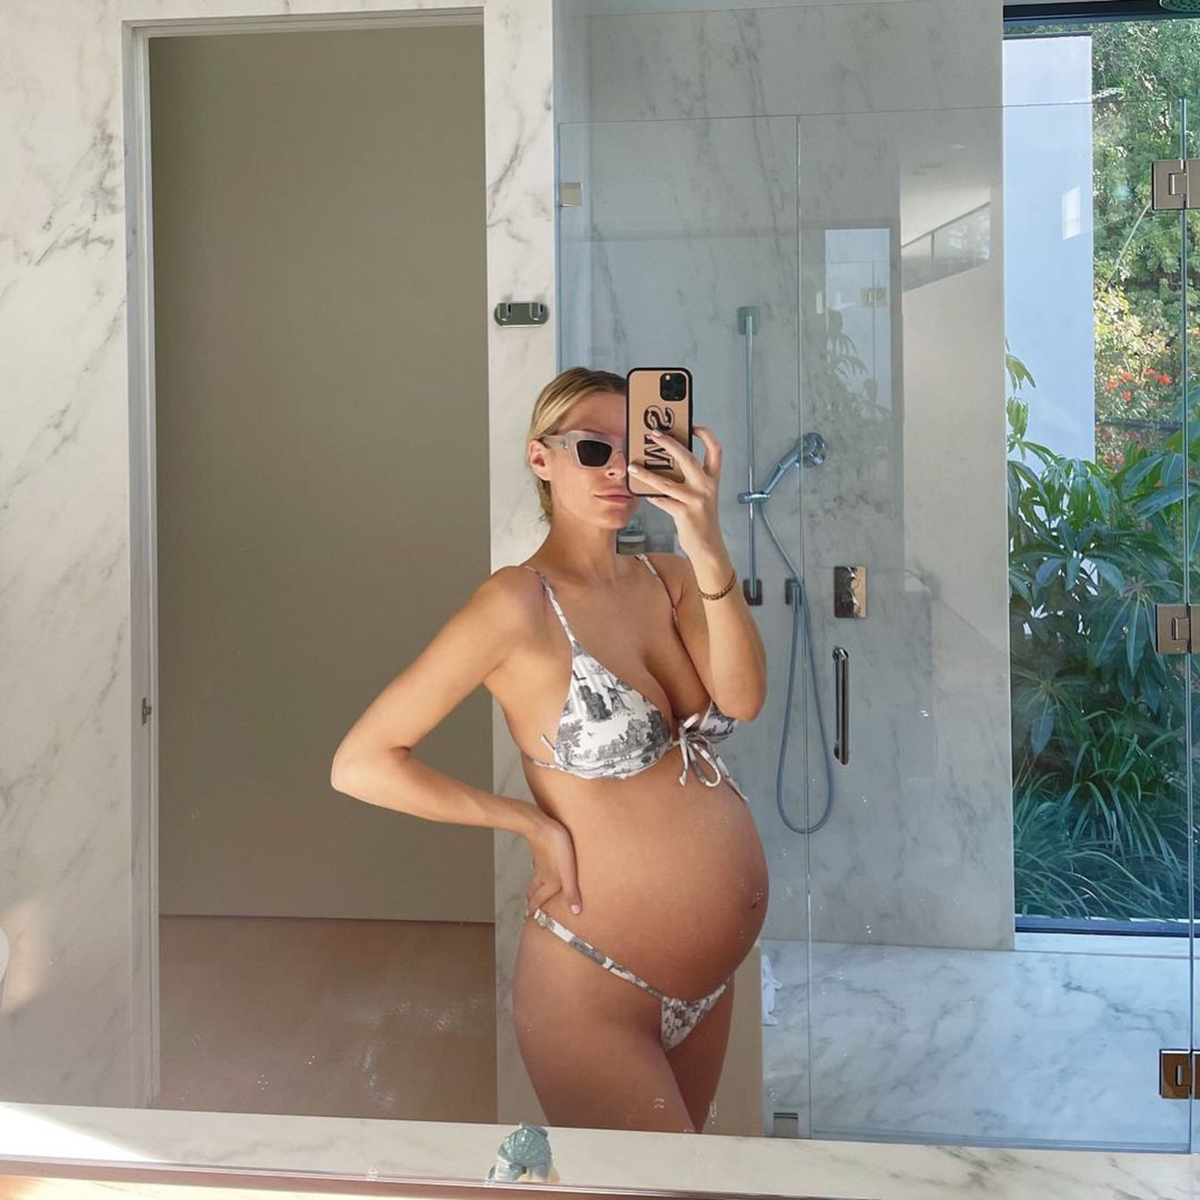 Bare Naked Nudist - Morgan Stewart Poses Nude to Celebrate Her Last Month of Pregnancy - E!  Online Deutschland